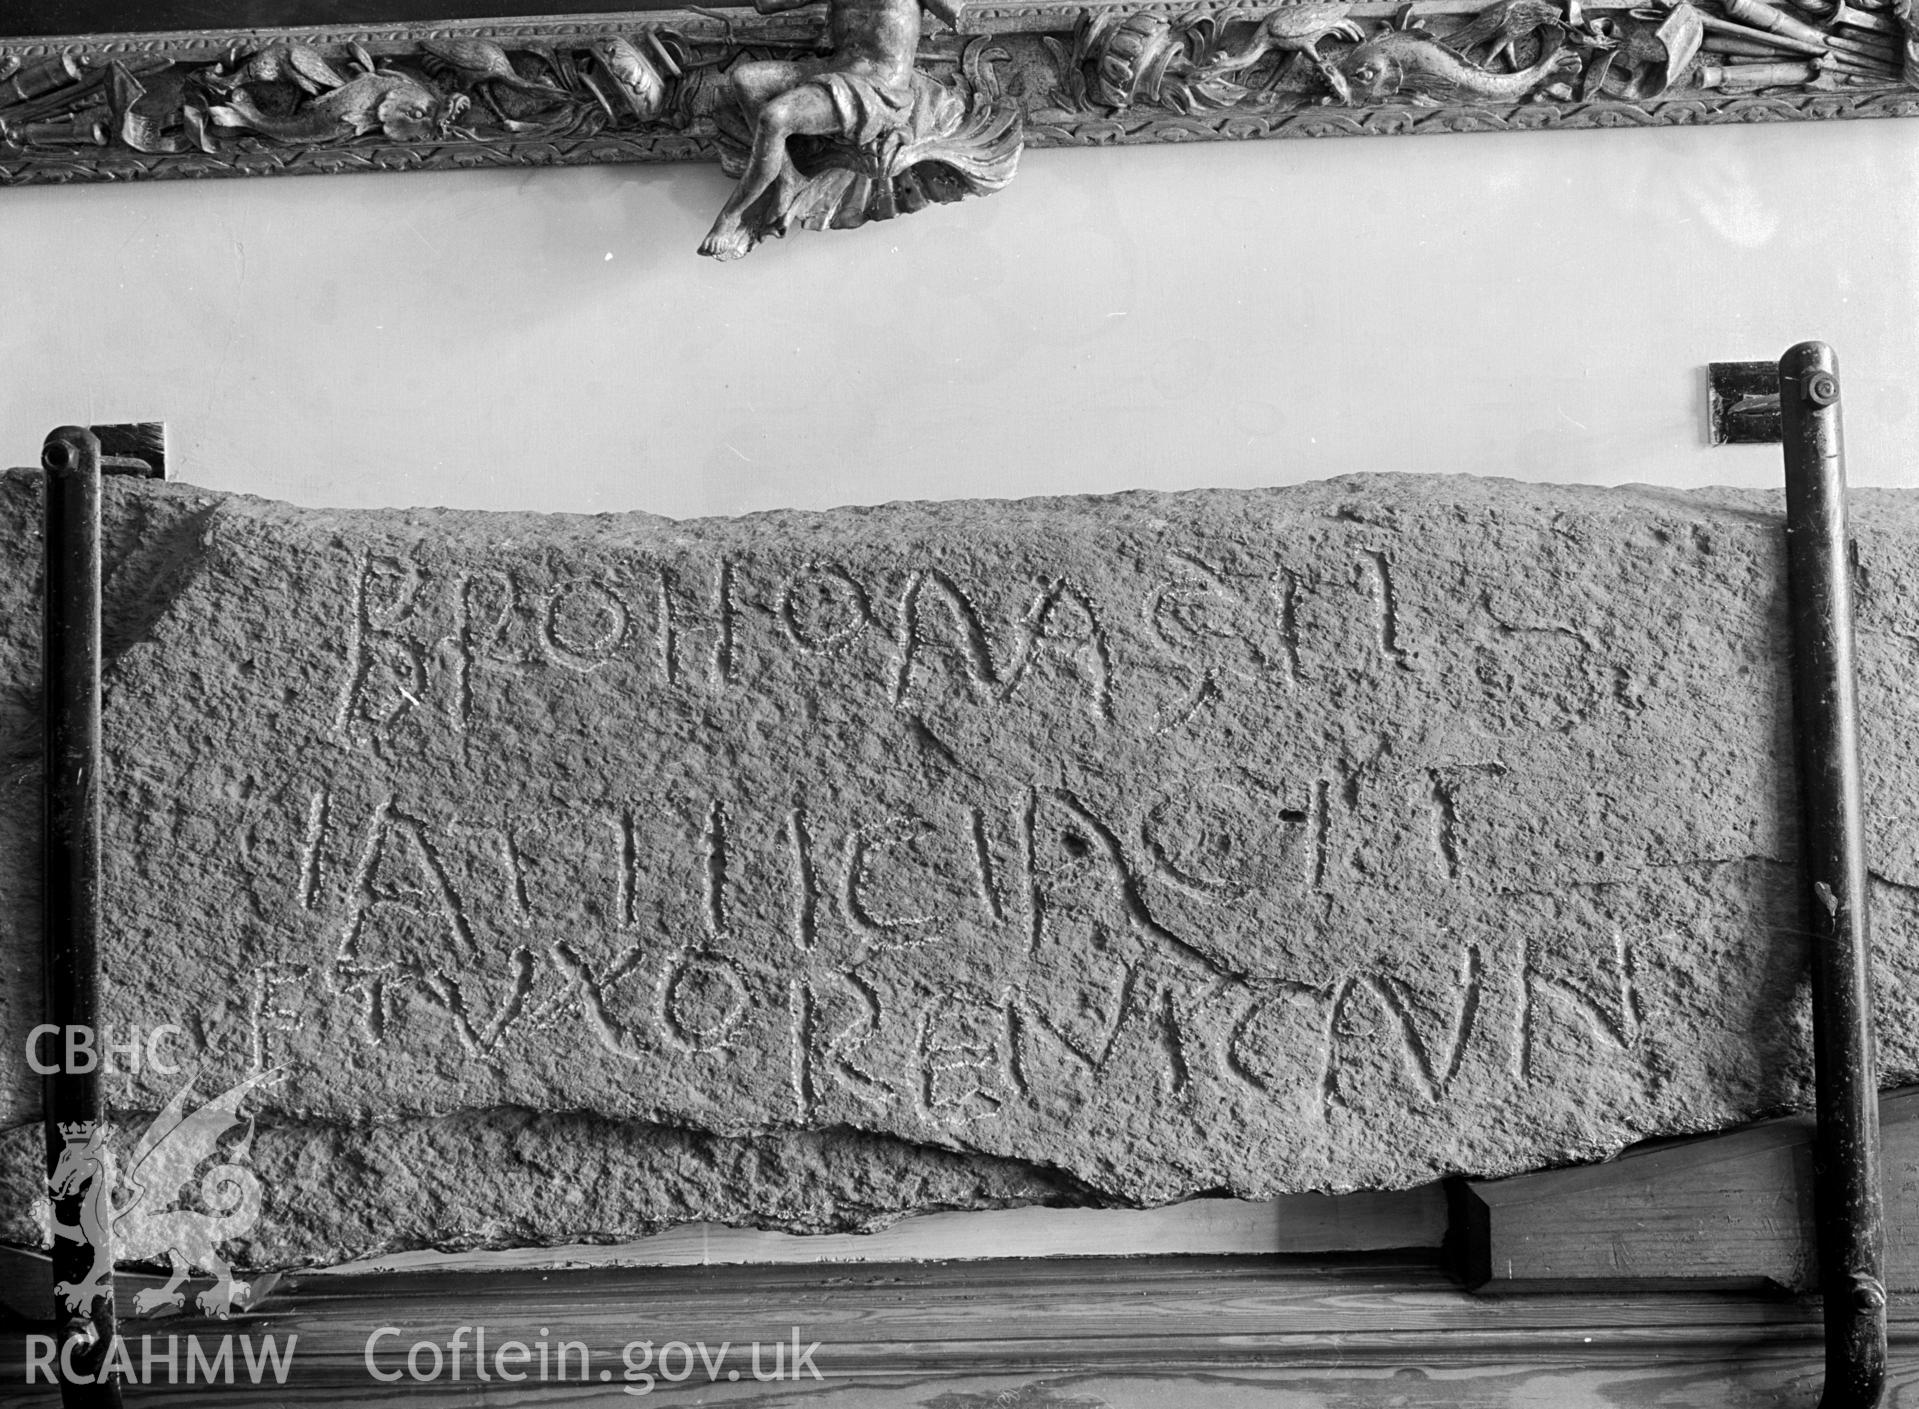 A picture of the Brohomaglus stone. A mounted stone with an inscription.